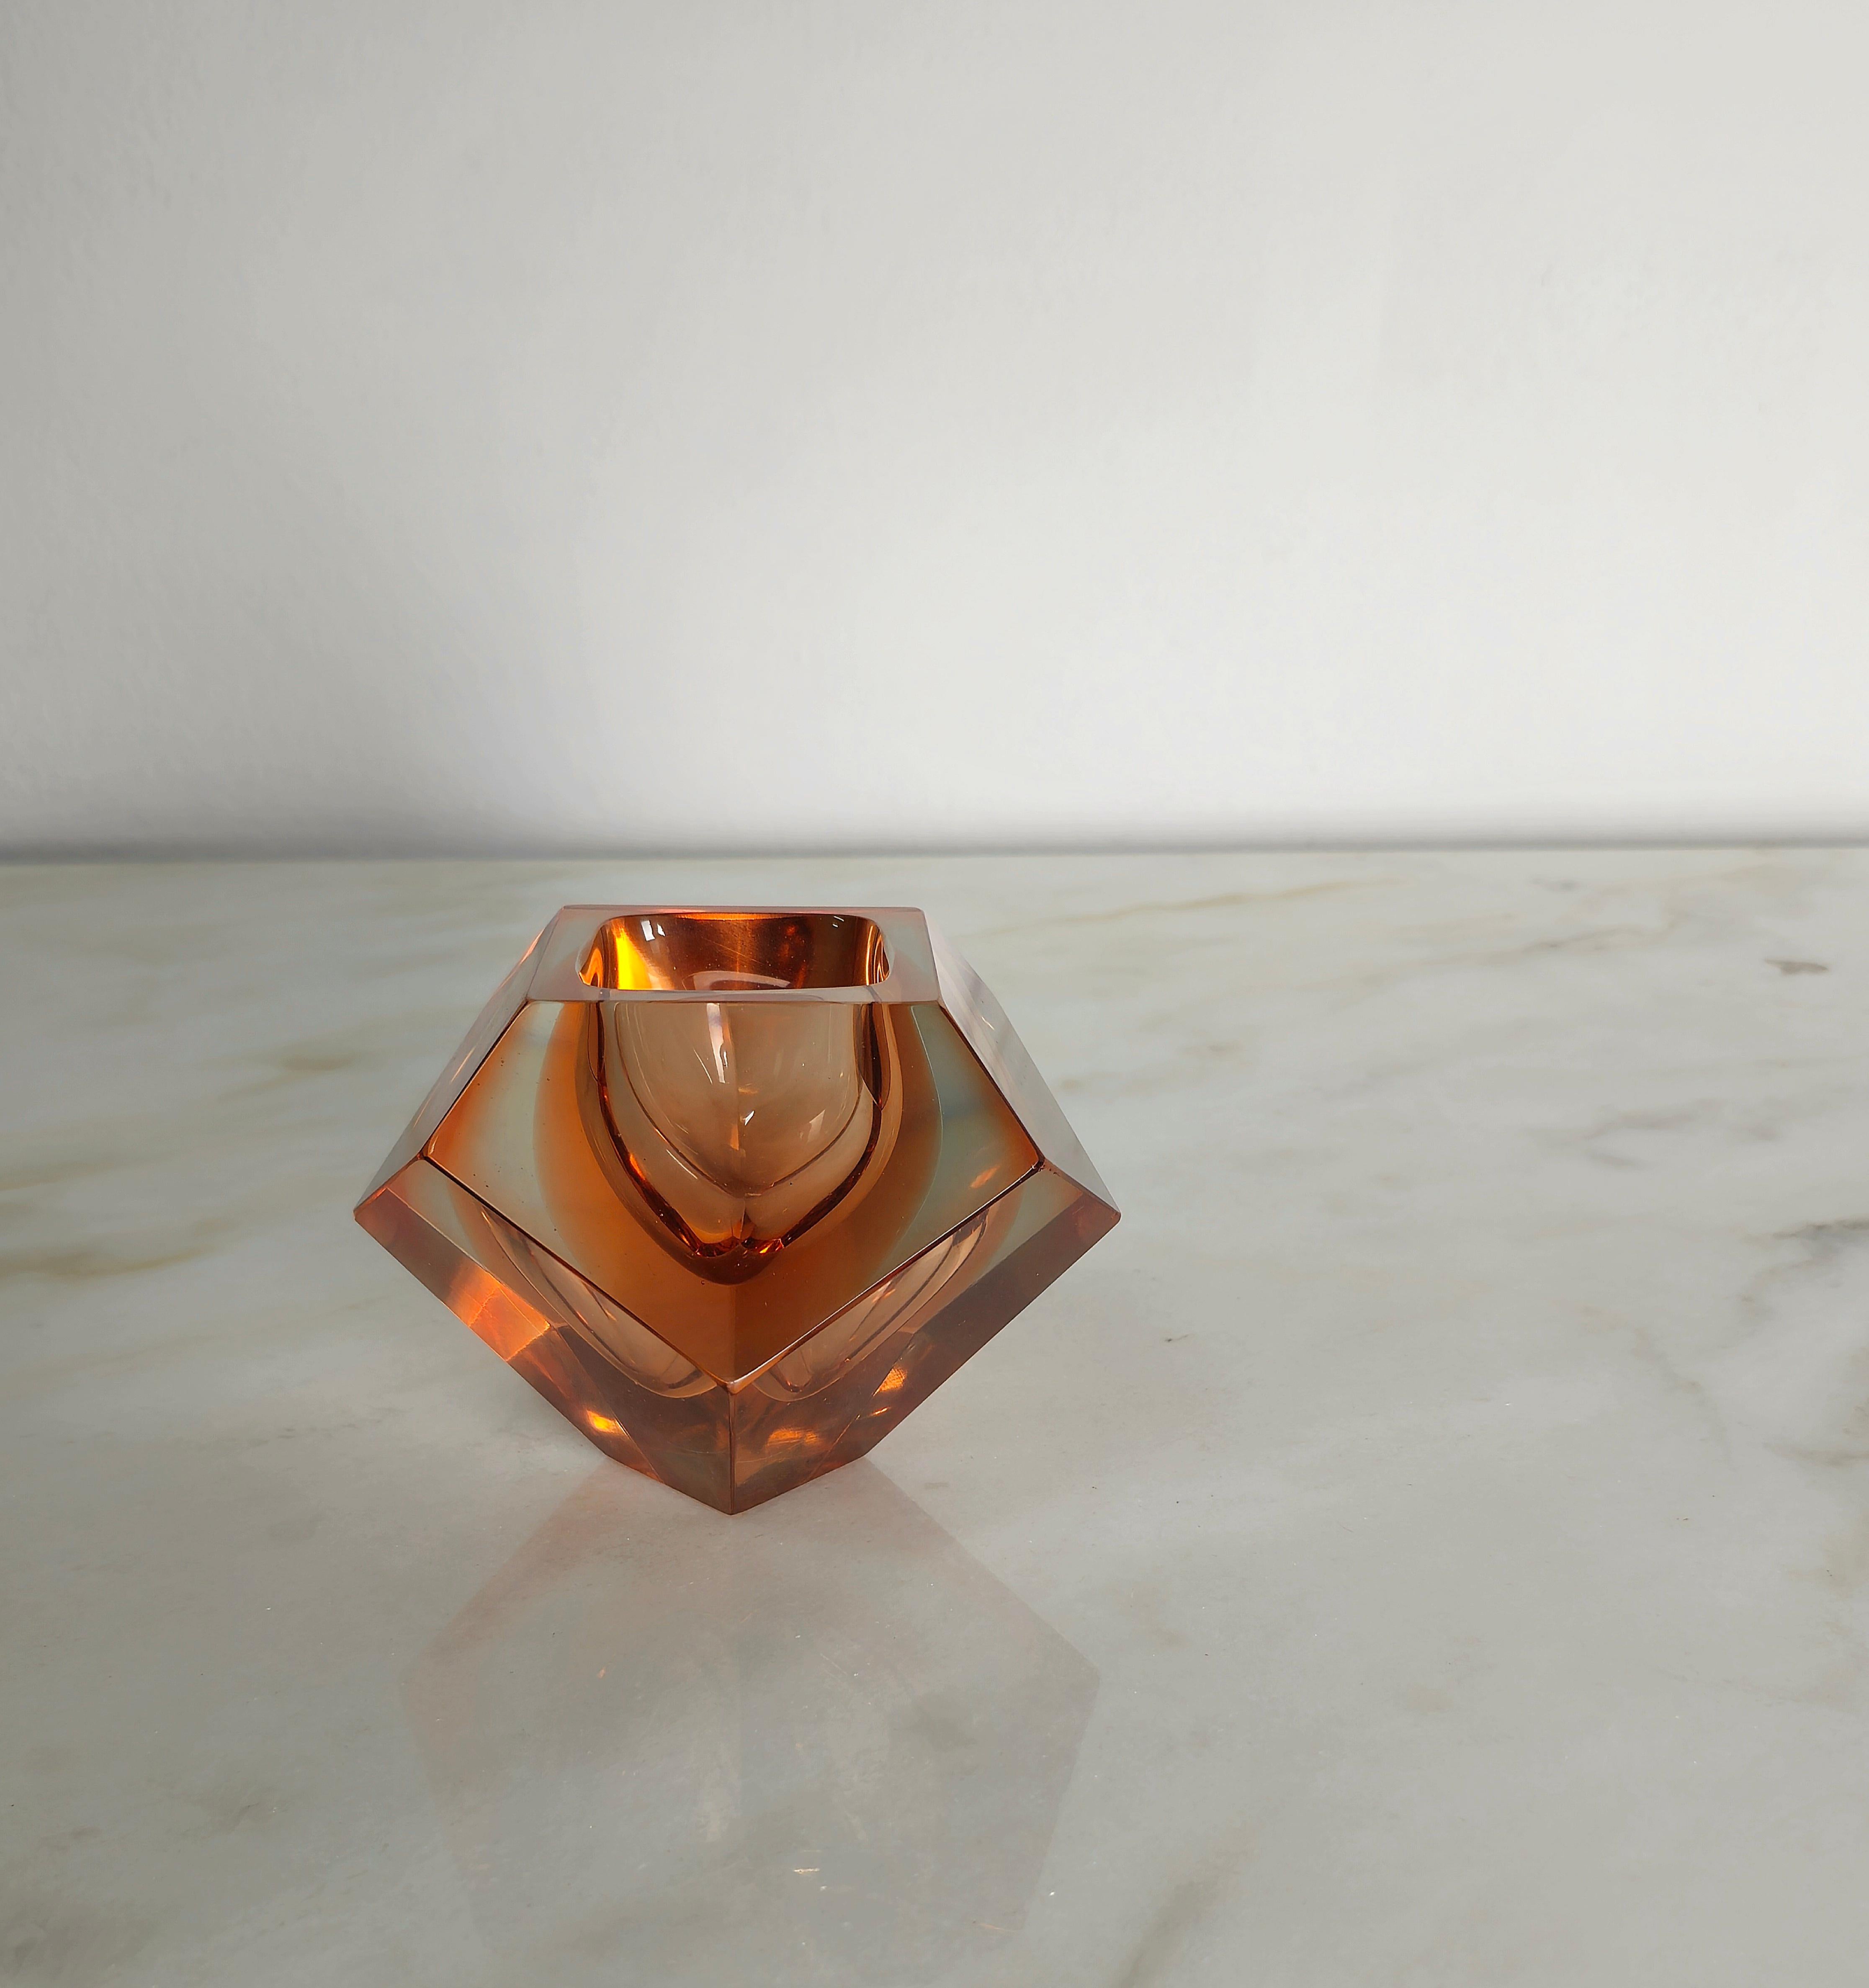 Vide-poche/ashtray designed by the Italian designer Flavio Poli and produced in the 70s.
the object was made of Murano glass in the shape of a diamond, with shades of colors such as honey and amber that cross the entire 